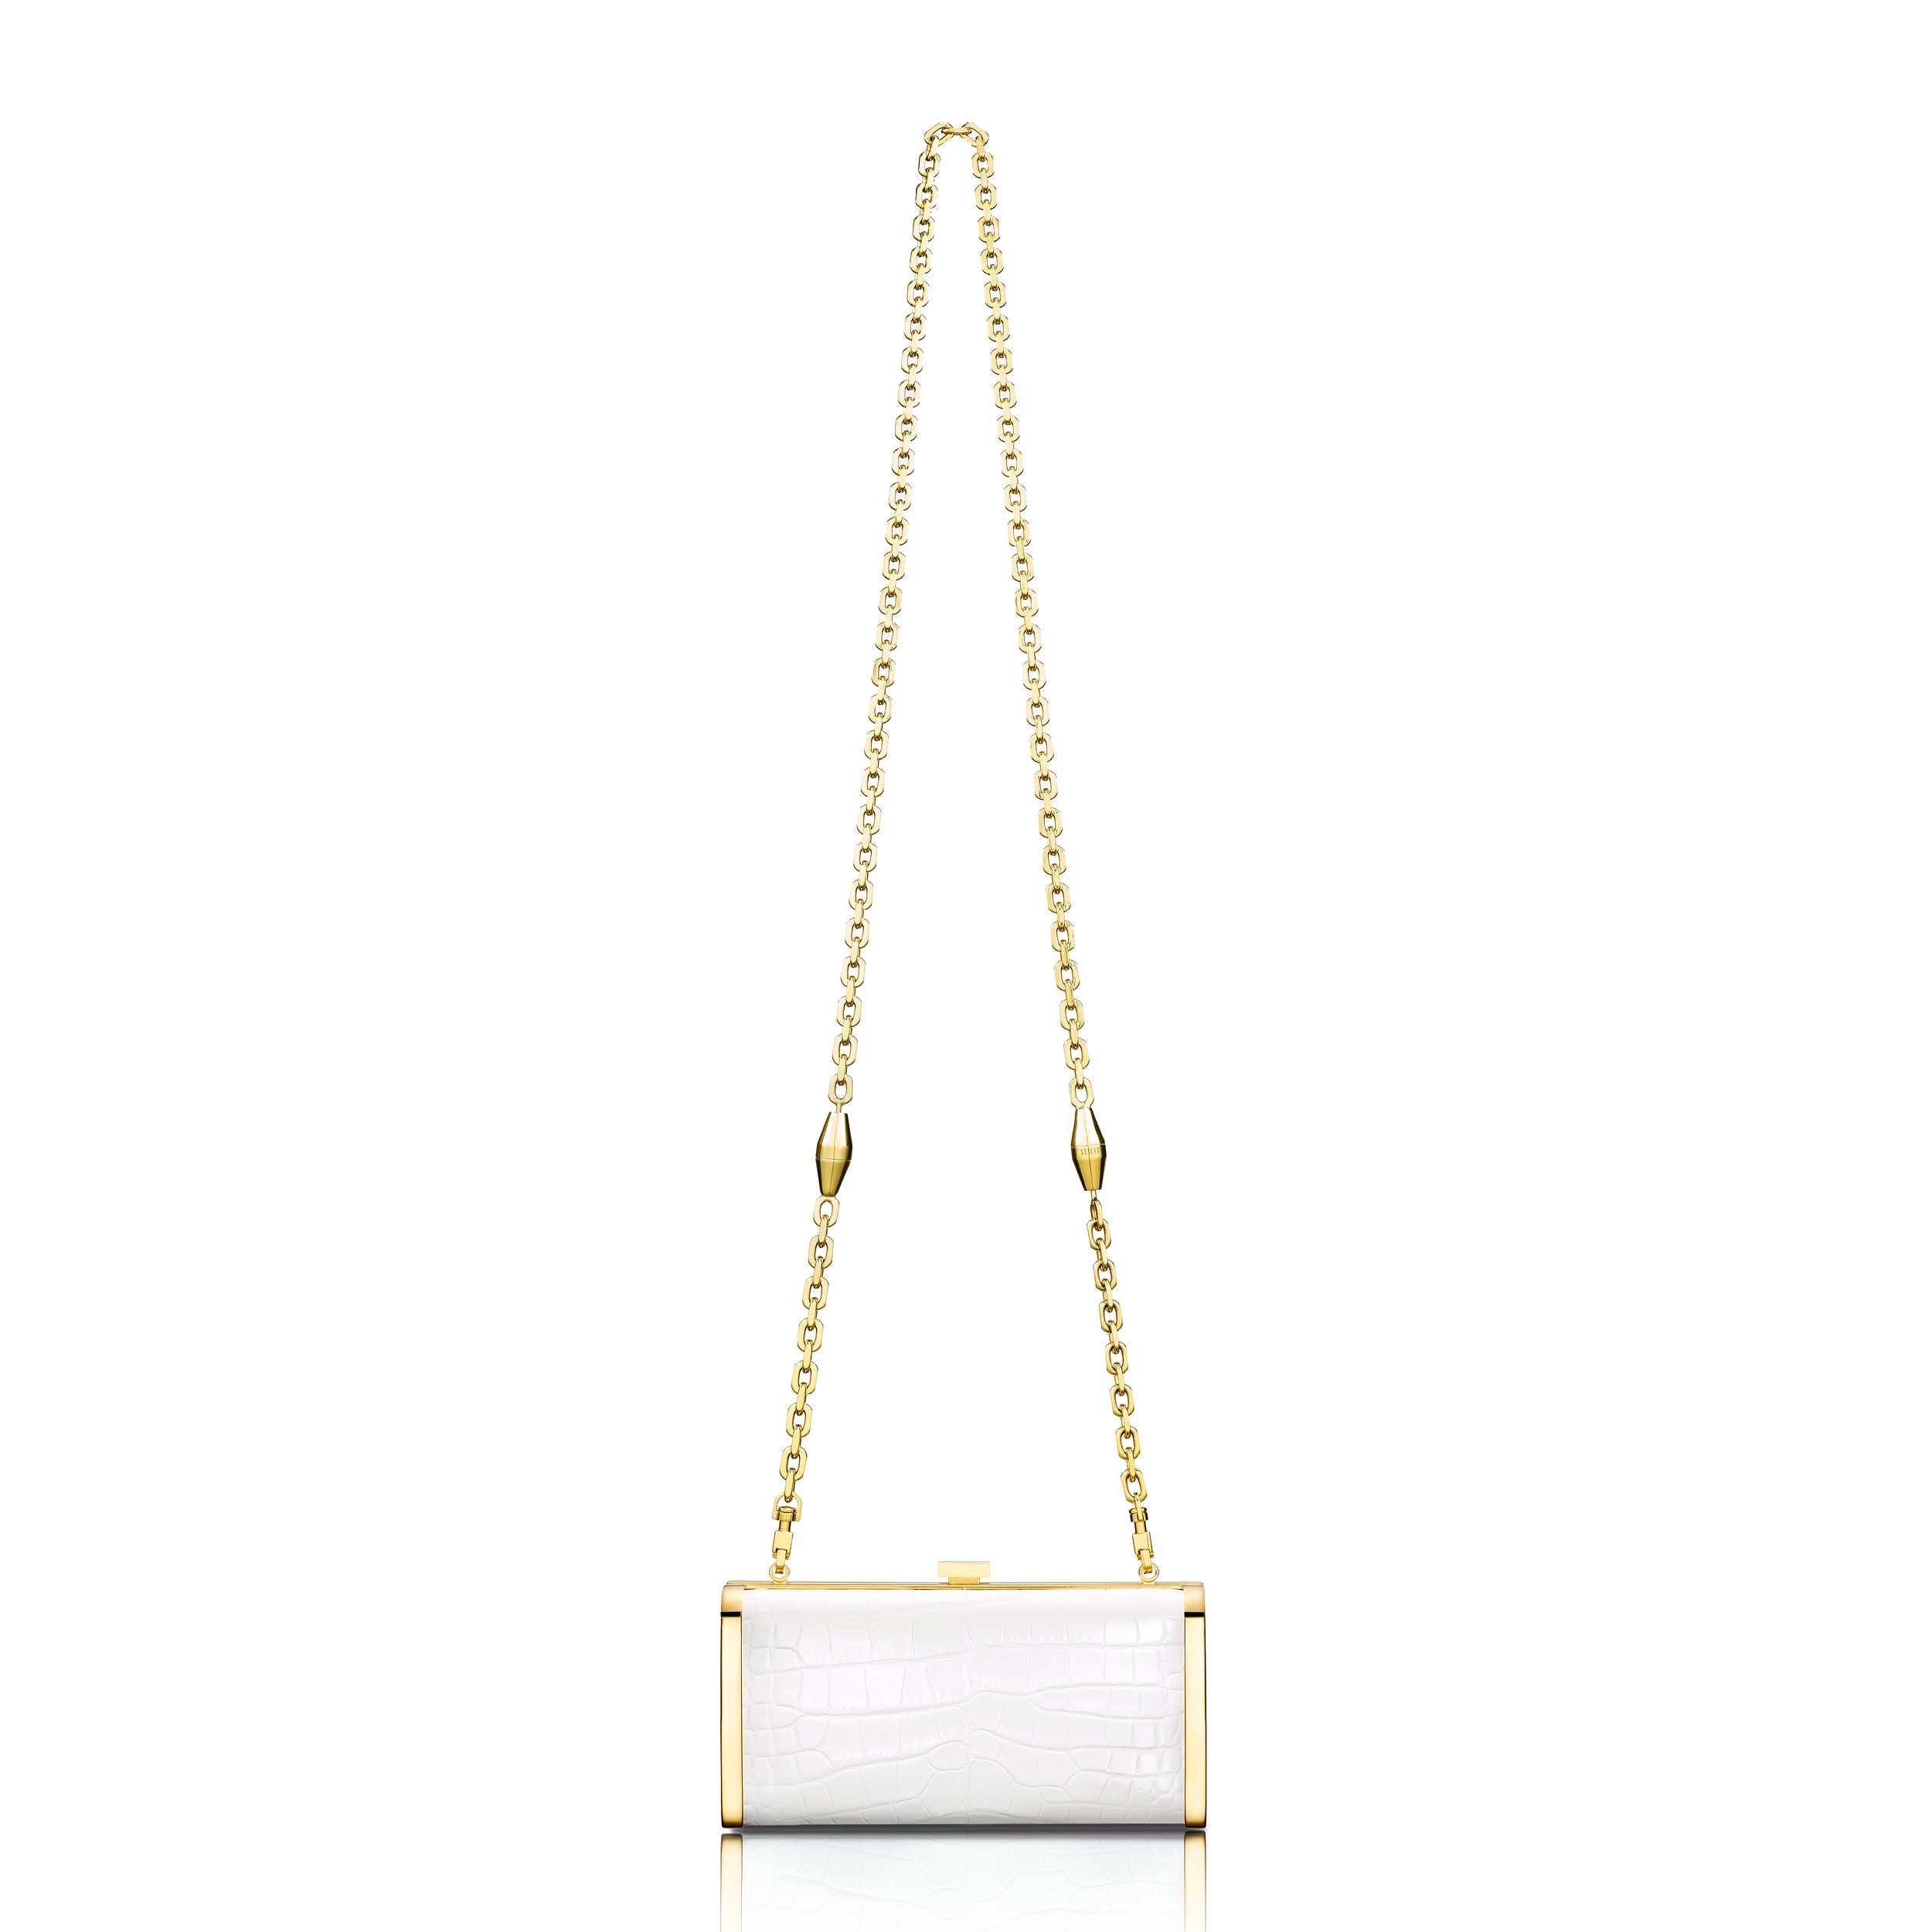 STALVEY Square Clutch in White Alligator with 24kt Gold Hardware Front View with Chain